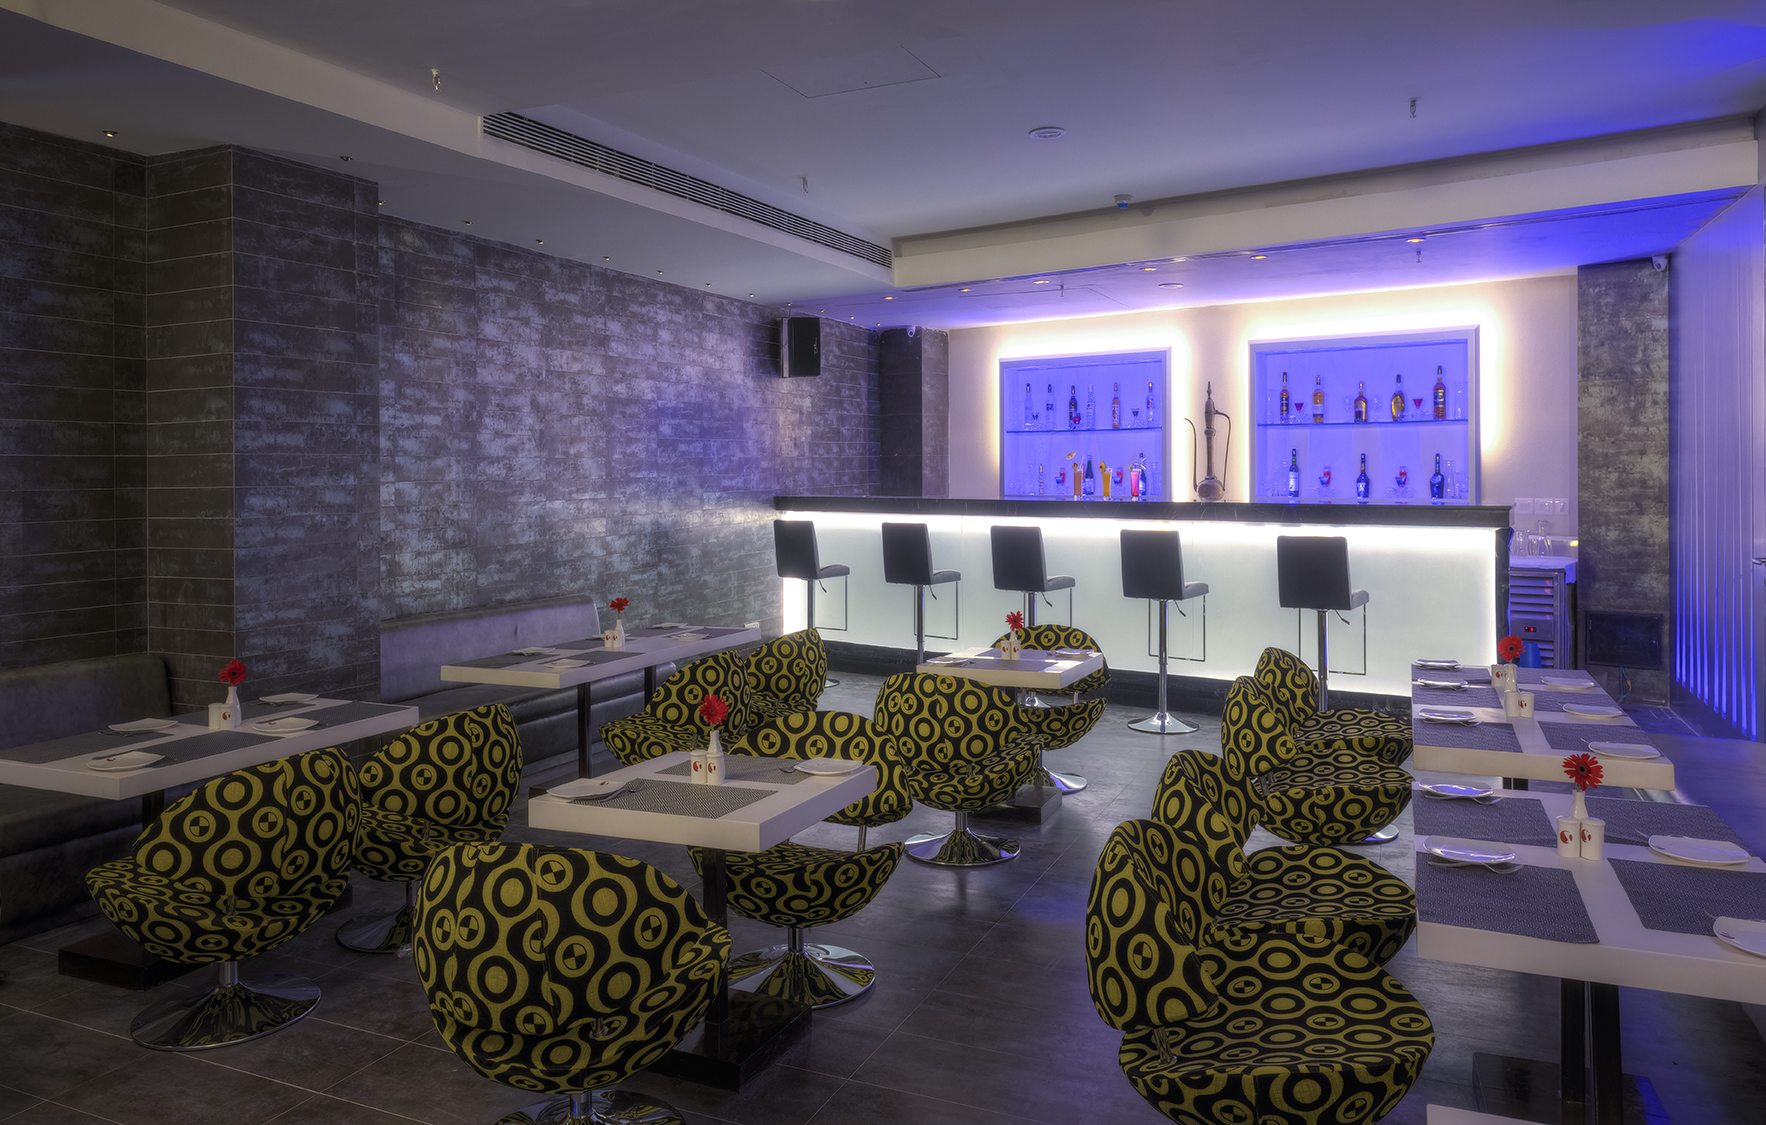 Pep Up- The Exclusive Bar at Sonotel Hotel- Image 6